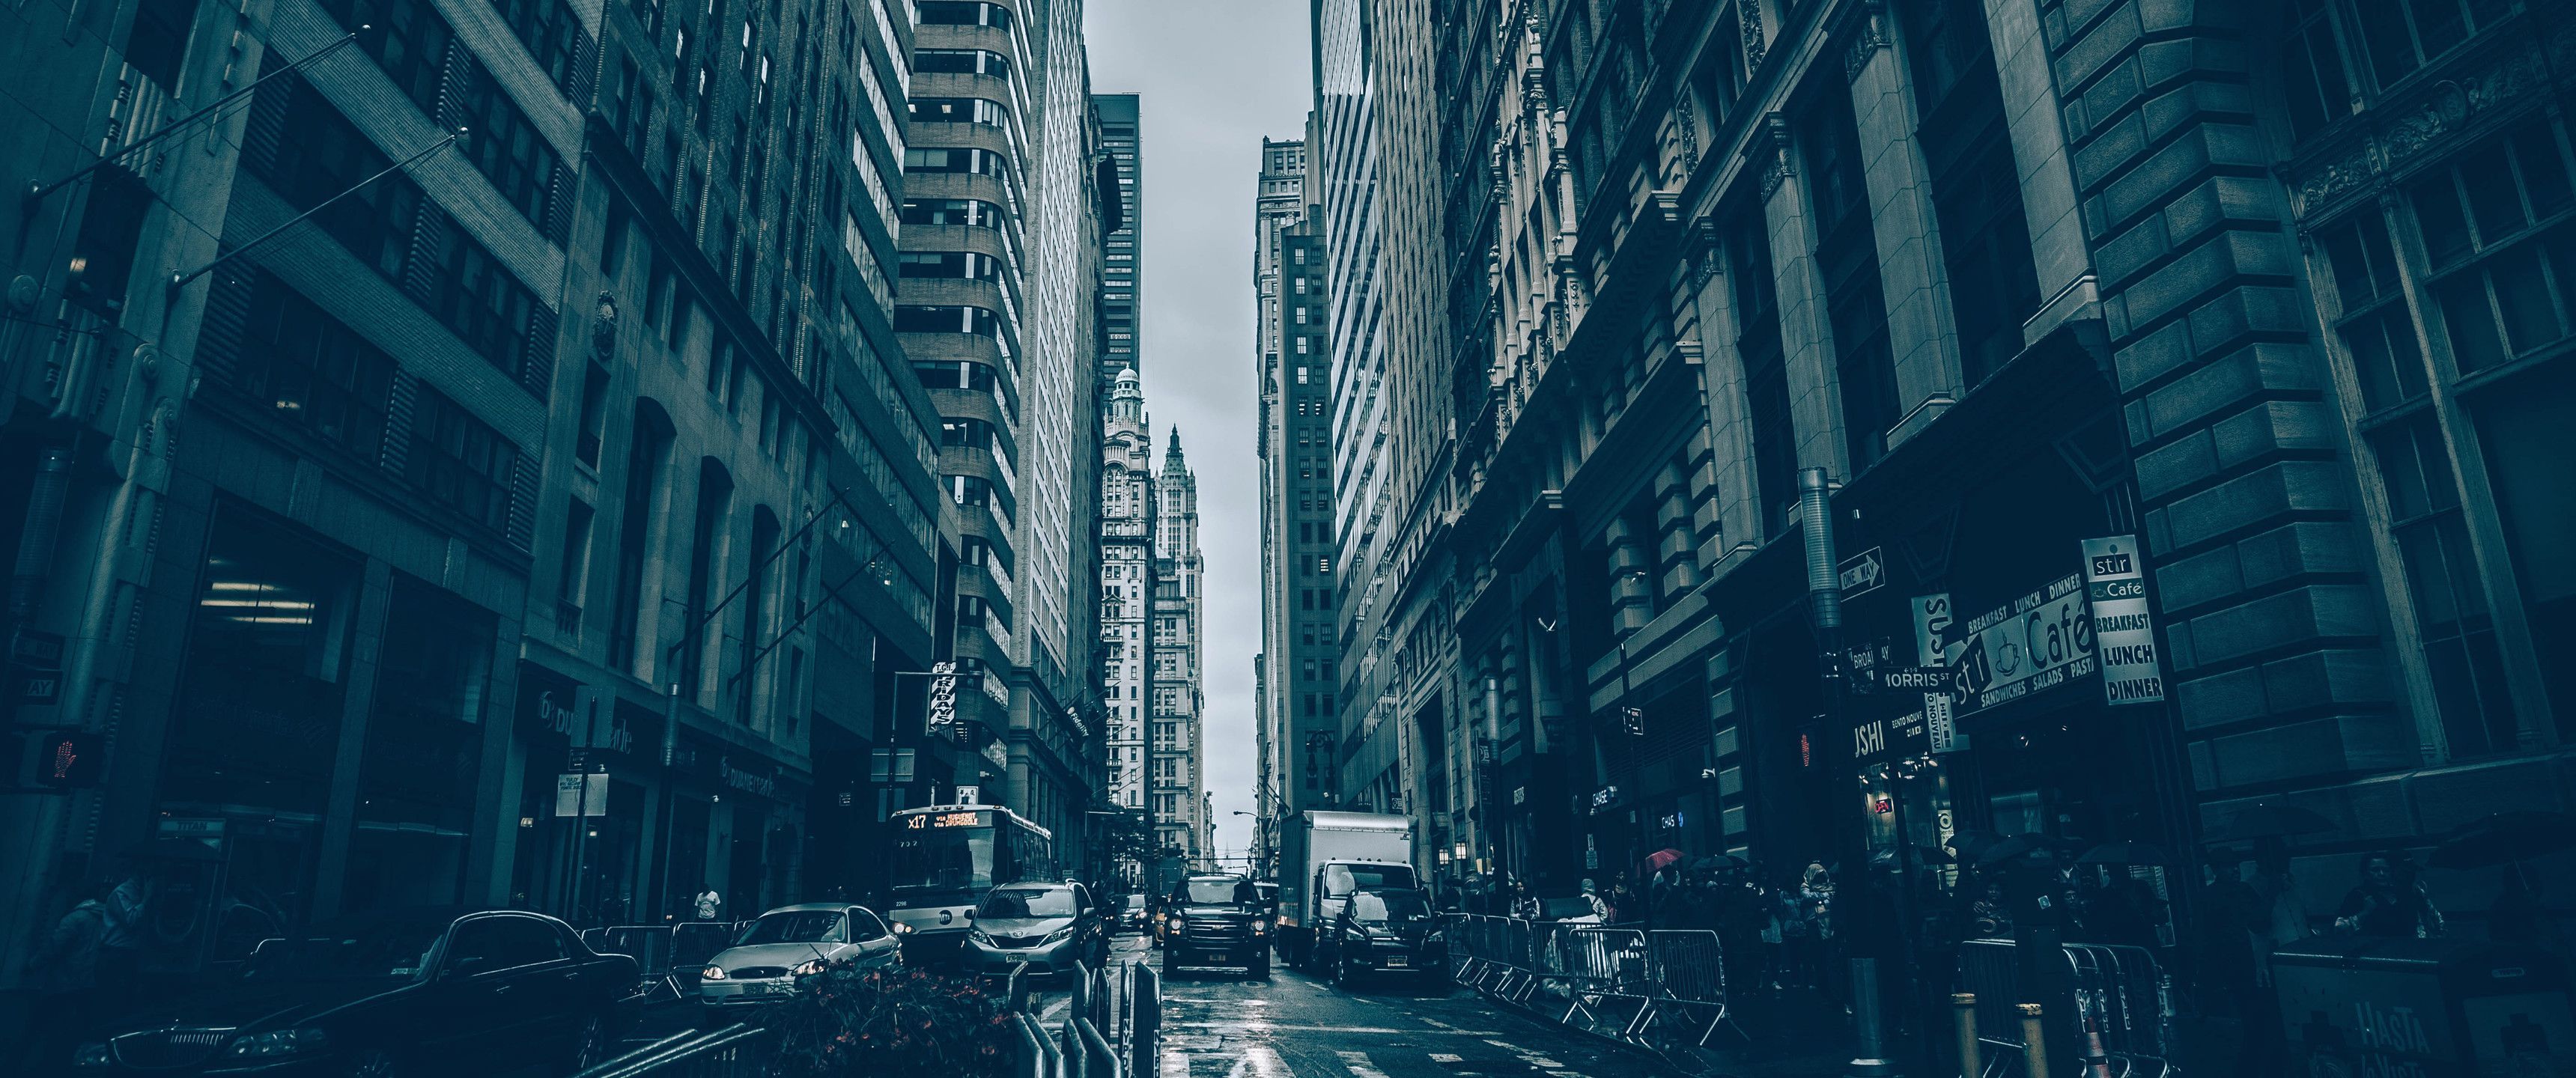 A street with tall buildings and people walking - 3440x1440